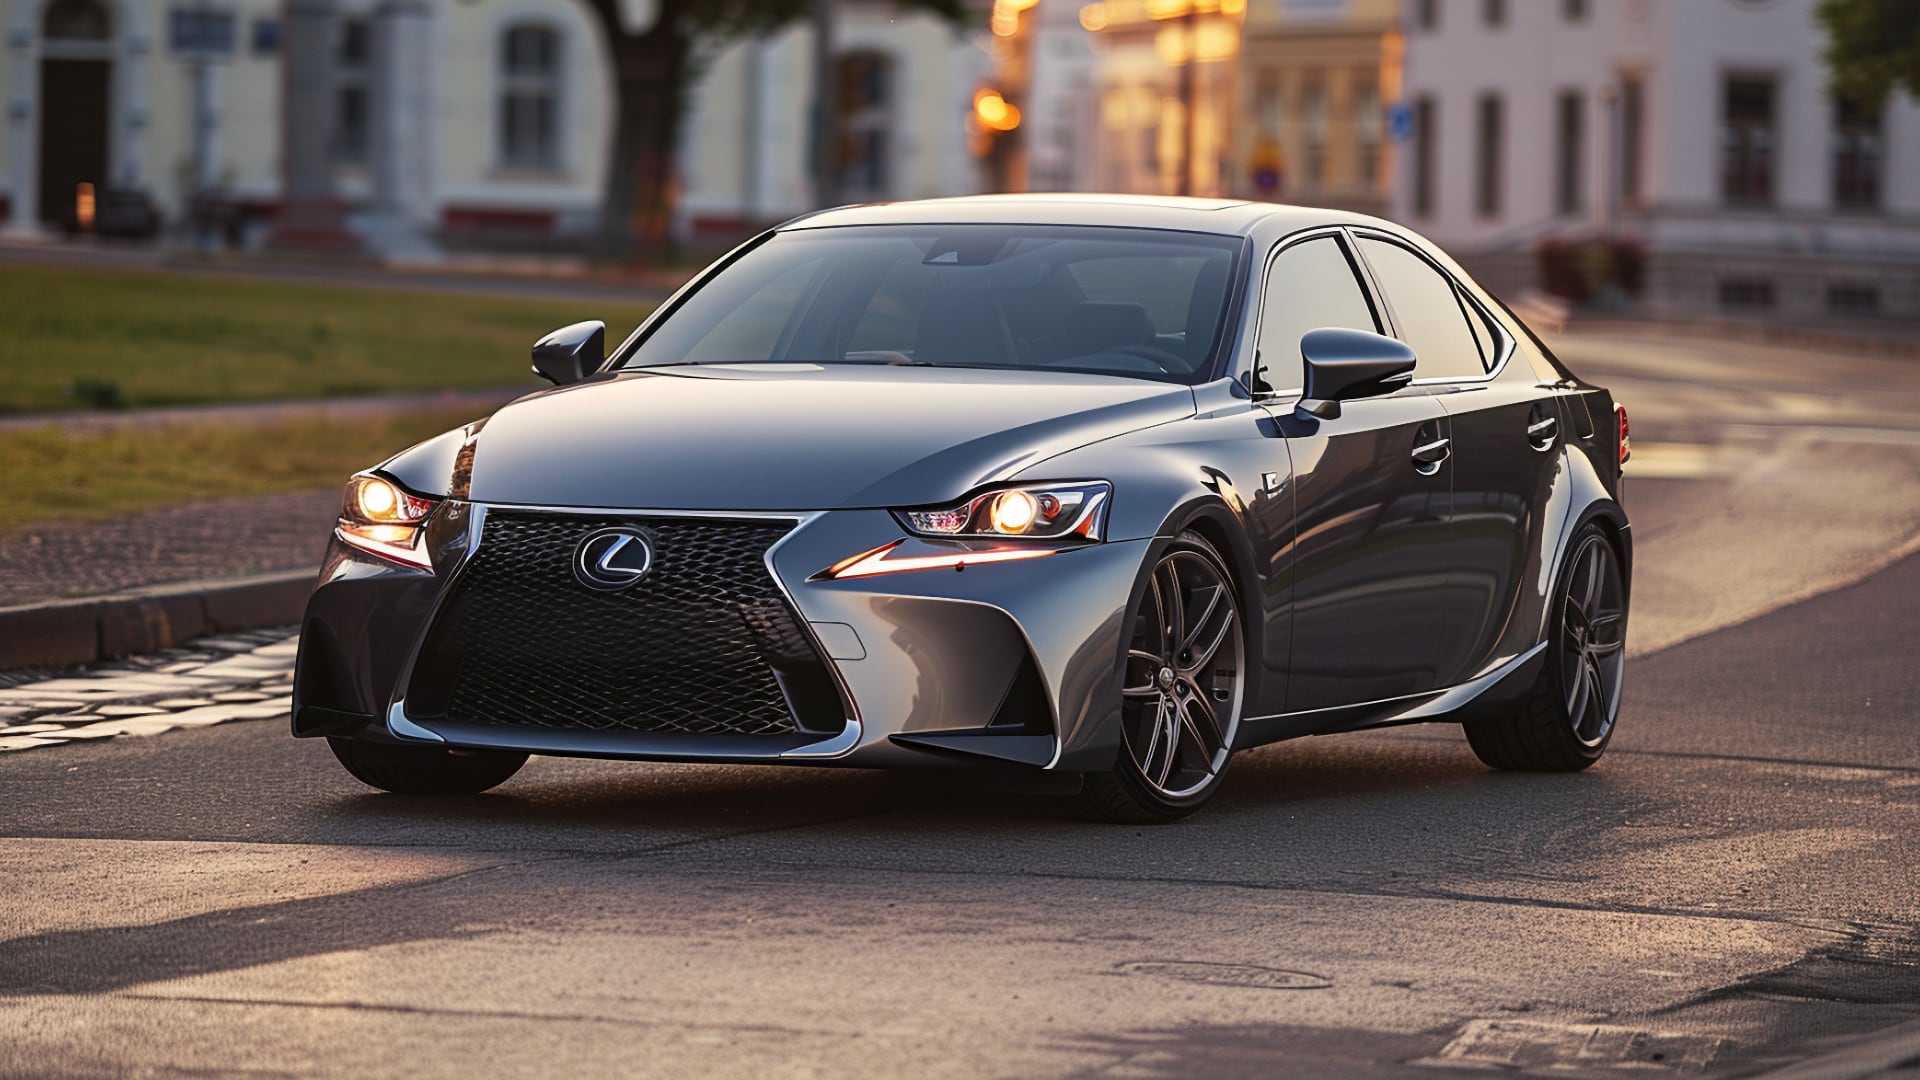 The 2019 Lexus IS 250 is driving down a city street.